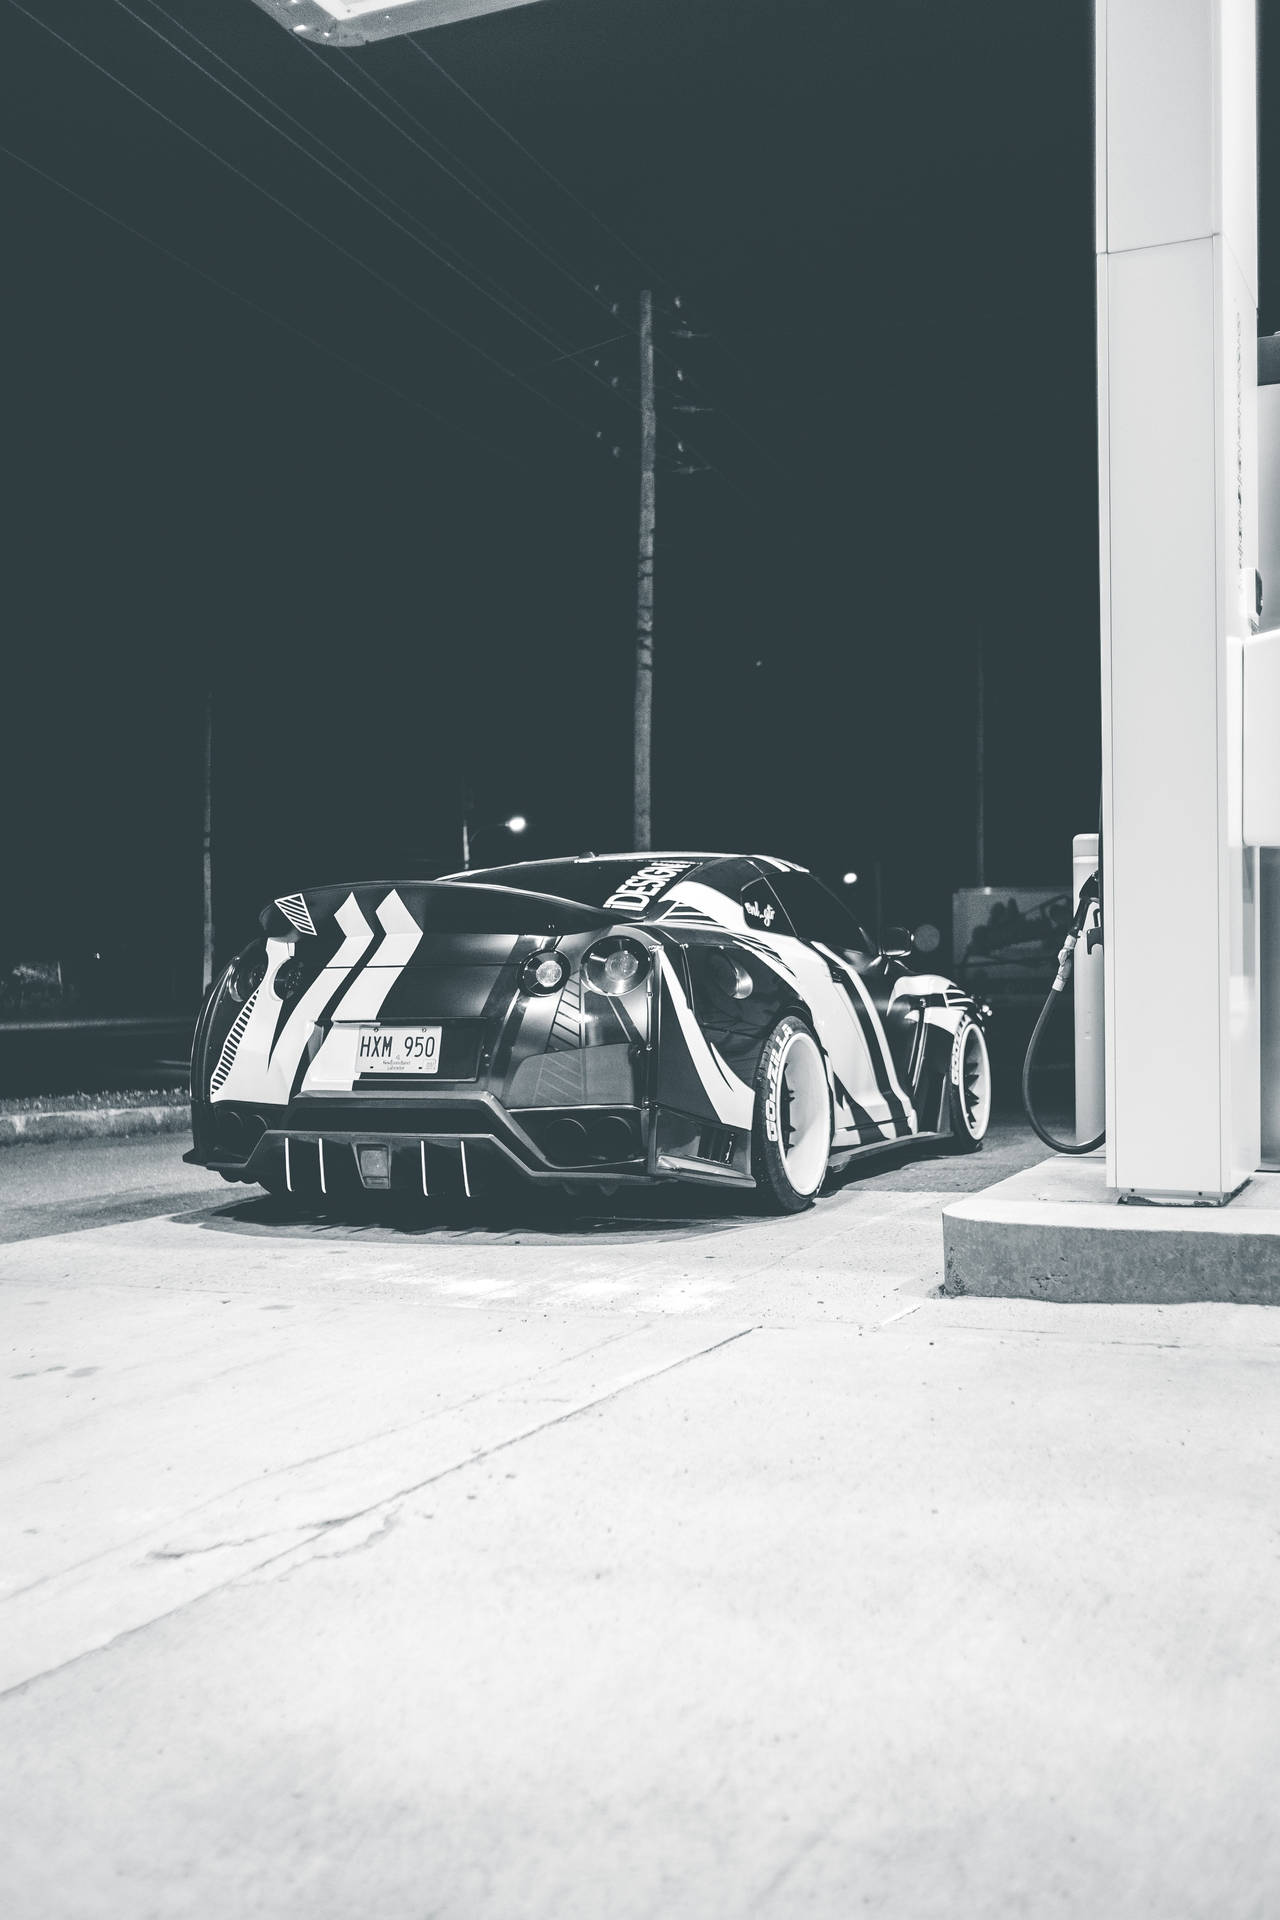 Grayscale Gas Station Background